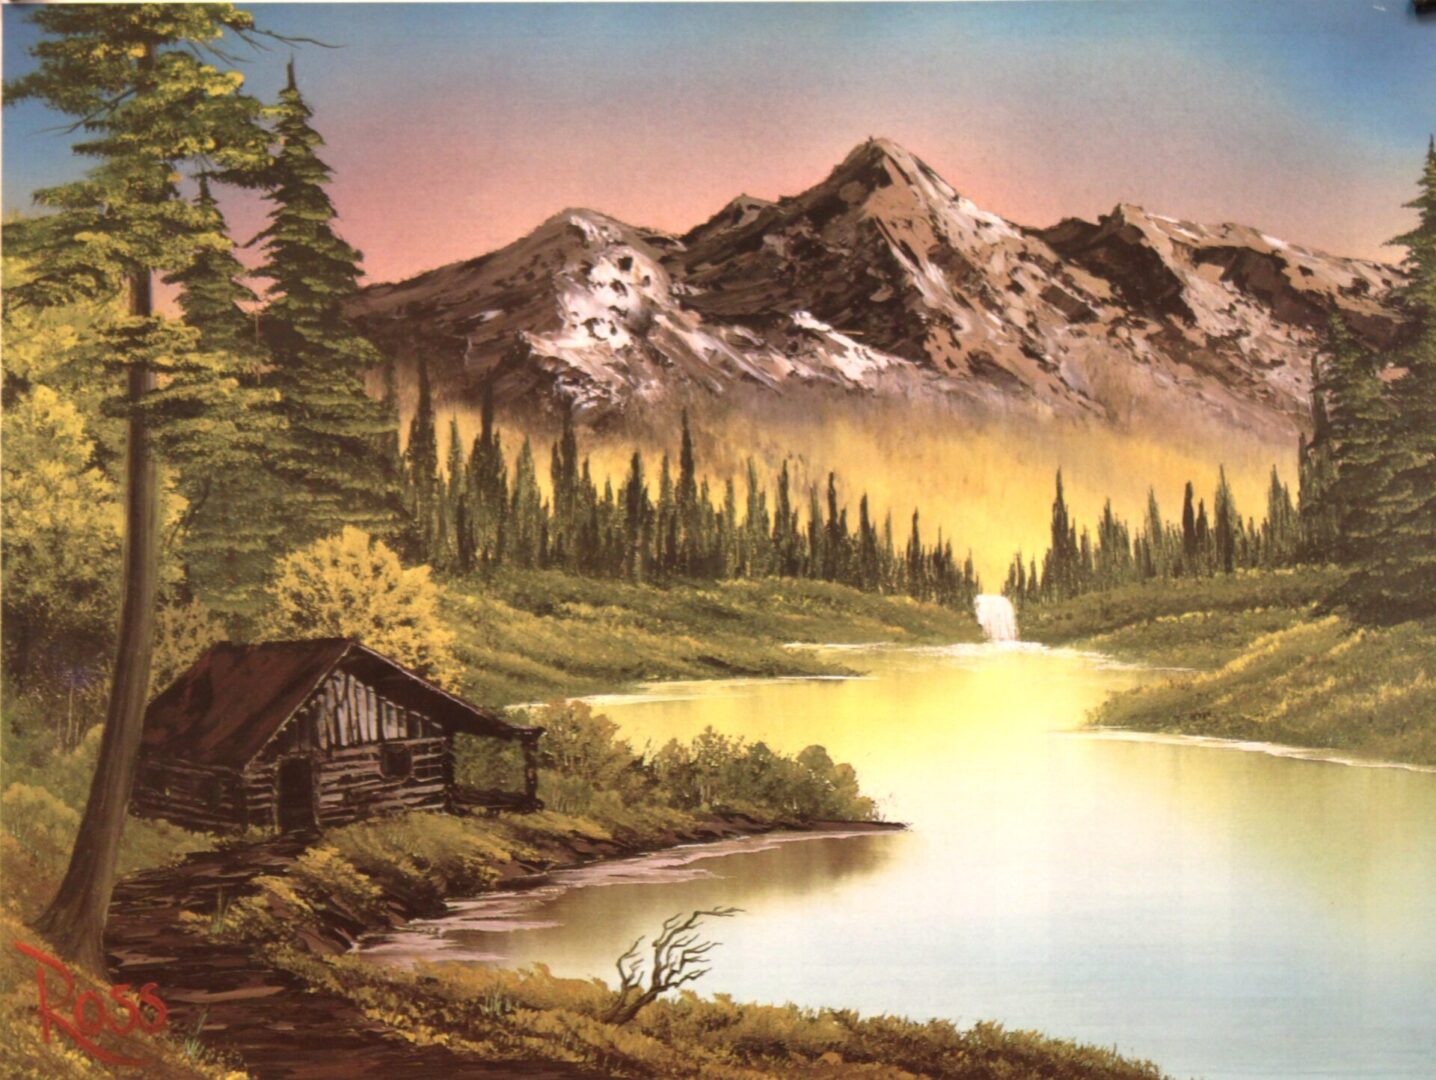 A beautiful painting of mountains and forest and river with a small hut.